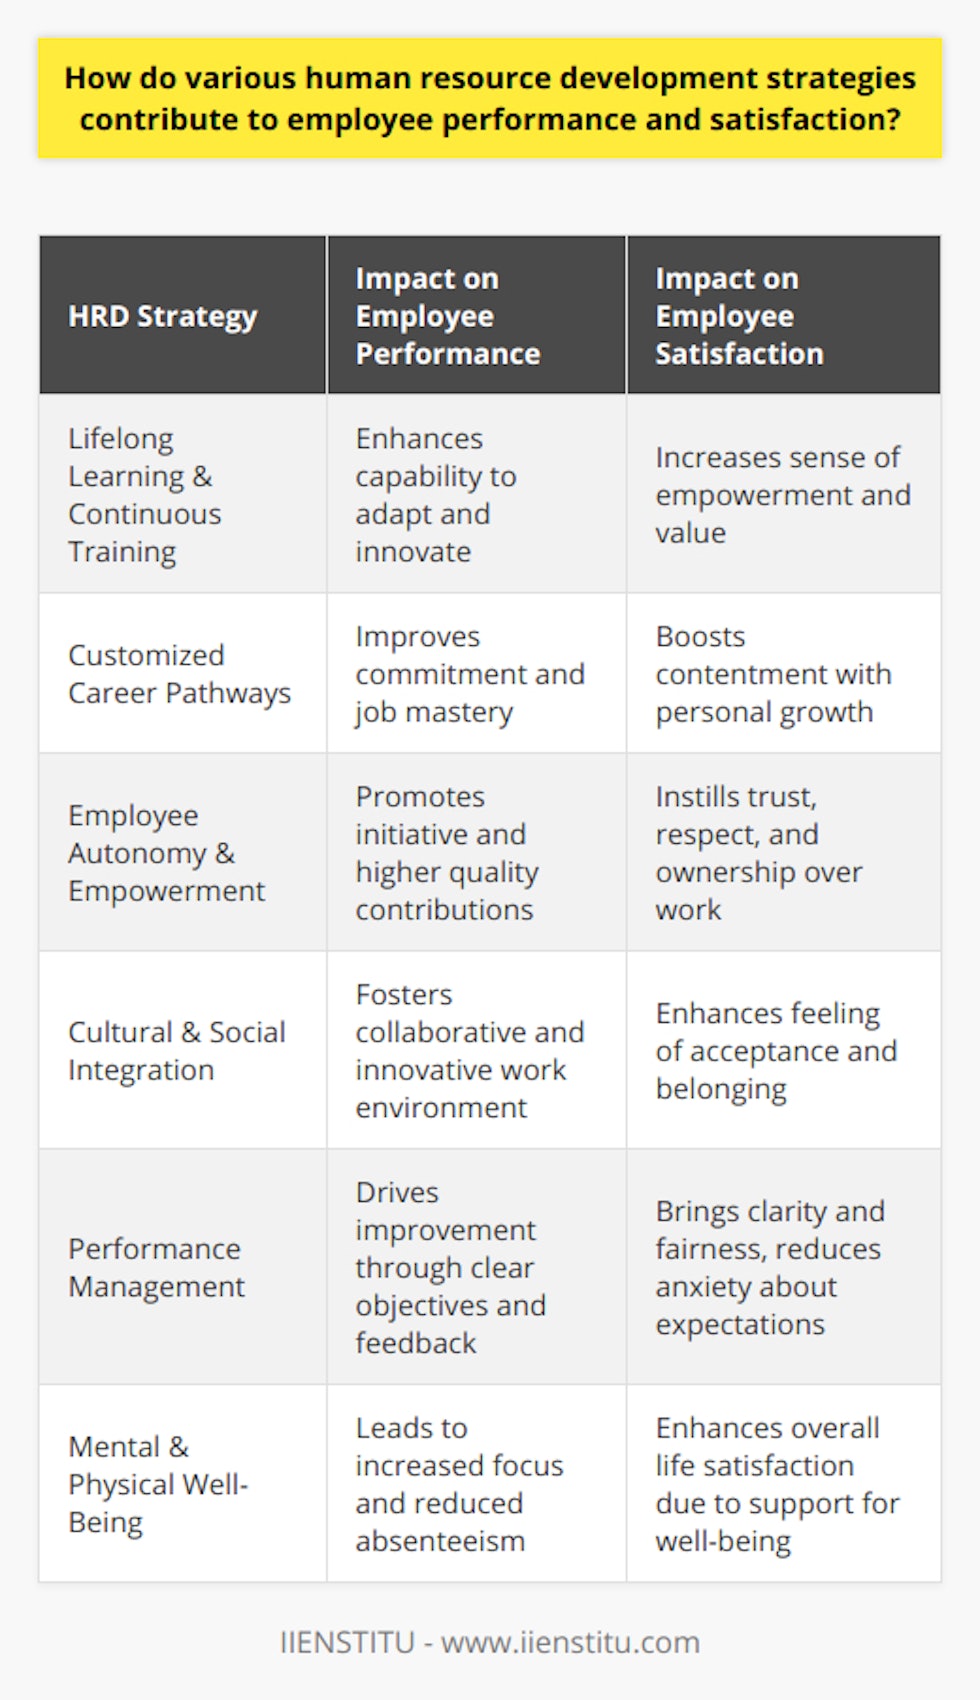 Human Resource Development (HRD) strategies are integral in forging a workforce that is both motivated and capable. Employers who prioritize these strategies tend to experience better productivity, lower turnover, and higher levels of employee engagement. Here are several key HRD strategies that have a profound impact on employee performance and satisfaction:Lifelong Learning and Continuous Training:HRD emphasizes continuous professional development. Employees who are given opportunities to learn and grow often feel more empowered and appreciated. Continual training sessions, seminars, and workshops allow employees to keep up with the latest industry trends, acquire new skills, and stay competitive. This engagement in lifelong learning not only boosts performance but also enhances job satisfaction as employees feel equipped to tackle new challenges.Customized Career Pathways:Personalized career progression plans are a valuable aspect of HRD strategies. Personalization shows employees that an organization is invested in their individual growth. By working with each employee to set career goals and create pathways to achieve them, employees are more likely to be committed to their jobs and feel satisfied with their progress.Employee Autonomy and Empowerment:Empowering employees to have a greater say in decision-making processes fosters a sense of ownership. When employees are treated as vital members whose opinions matter, they are more likely to take initiative and offer innovative solutions. This autonomy can substantially increase performance levels, as well as job satisfaction by instilling trust and respect within the workplace.Cultural and Social Integration:Diversity and inclusion initiatives within HRD help create an environment where every employee feels part of the corporate culture. By embracing diversity, organizations not only attract a wider talent pool but also encourage an exchange of varied perspectives. When employees feel integrated socially and culture is inclusive, satisfaction levels rise, and productivity increases due to a harmonious working environment.Performance Management:Strategic HRD involves rigorous performance management to track and improve employee performance. Regular feedback and constructive criticism help employees recognize their strengths and the areas needing improvement. Furthermore, this process must be transparent and fair to ensure employees are held accountable and motivated to perform better, with a sense of fairness enhancing overall satisfaction.Mental and Physical Well-Being:Lastly, HRD strategies are increasingly focusing on mental health and stress management. With the acknowledgment that employee well-being directly impacts performance, organizations are instituting programs that offer counseling services, relaxation spaces, and health-related benefits. These wellness initiatives lead to a healthier workforce, fewer sick leaves, better focus, and subsequently, higher job satisfaction.By employing these multifaceted HRD strategies, companies can derive improved employee performance and higher levels of job satisfaction, resulting in a workplace where both the organization and its employees thrive. IIENSTITU, with its offerings on educational resources and HR development courses, can be seen as a facilitator for individuals and organizations seeking to implement such strategic HRD practices.